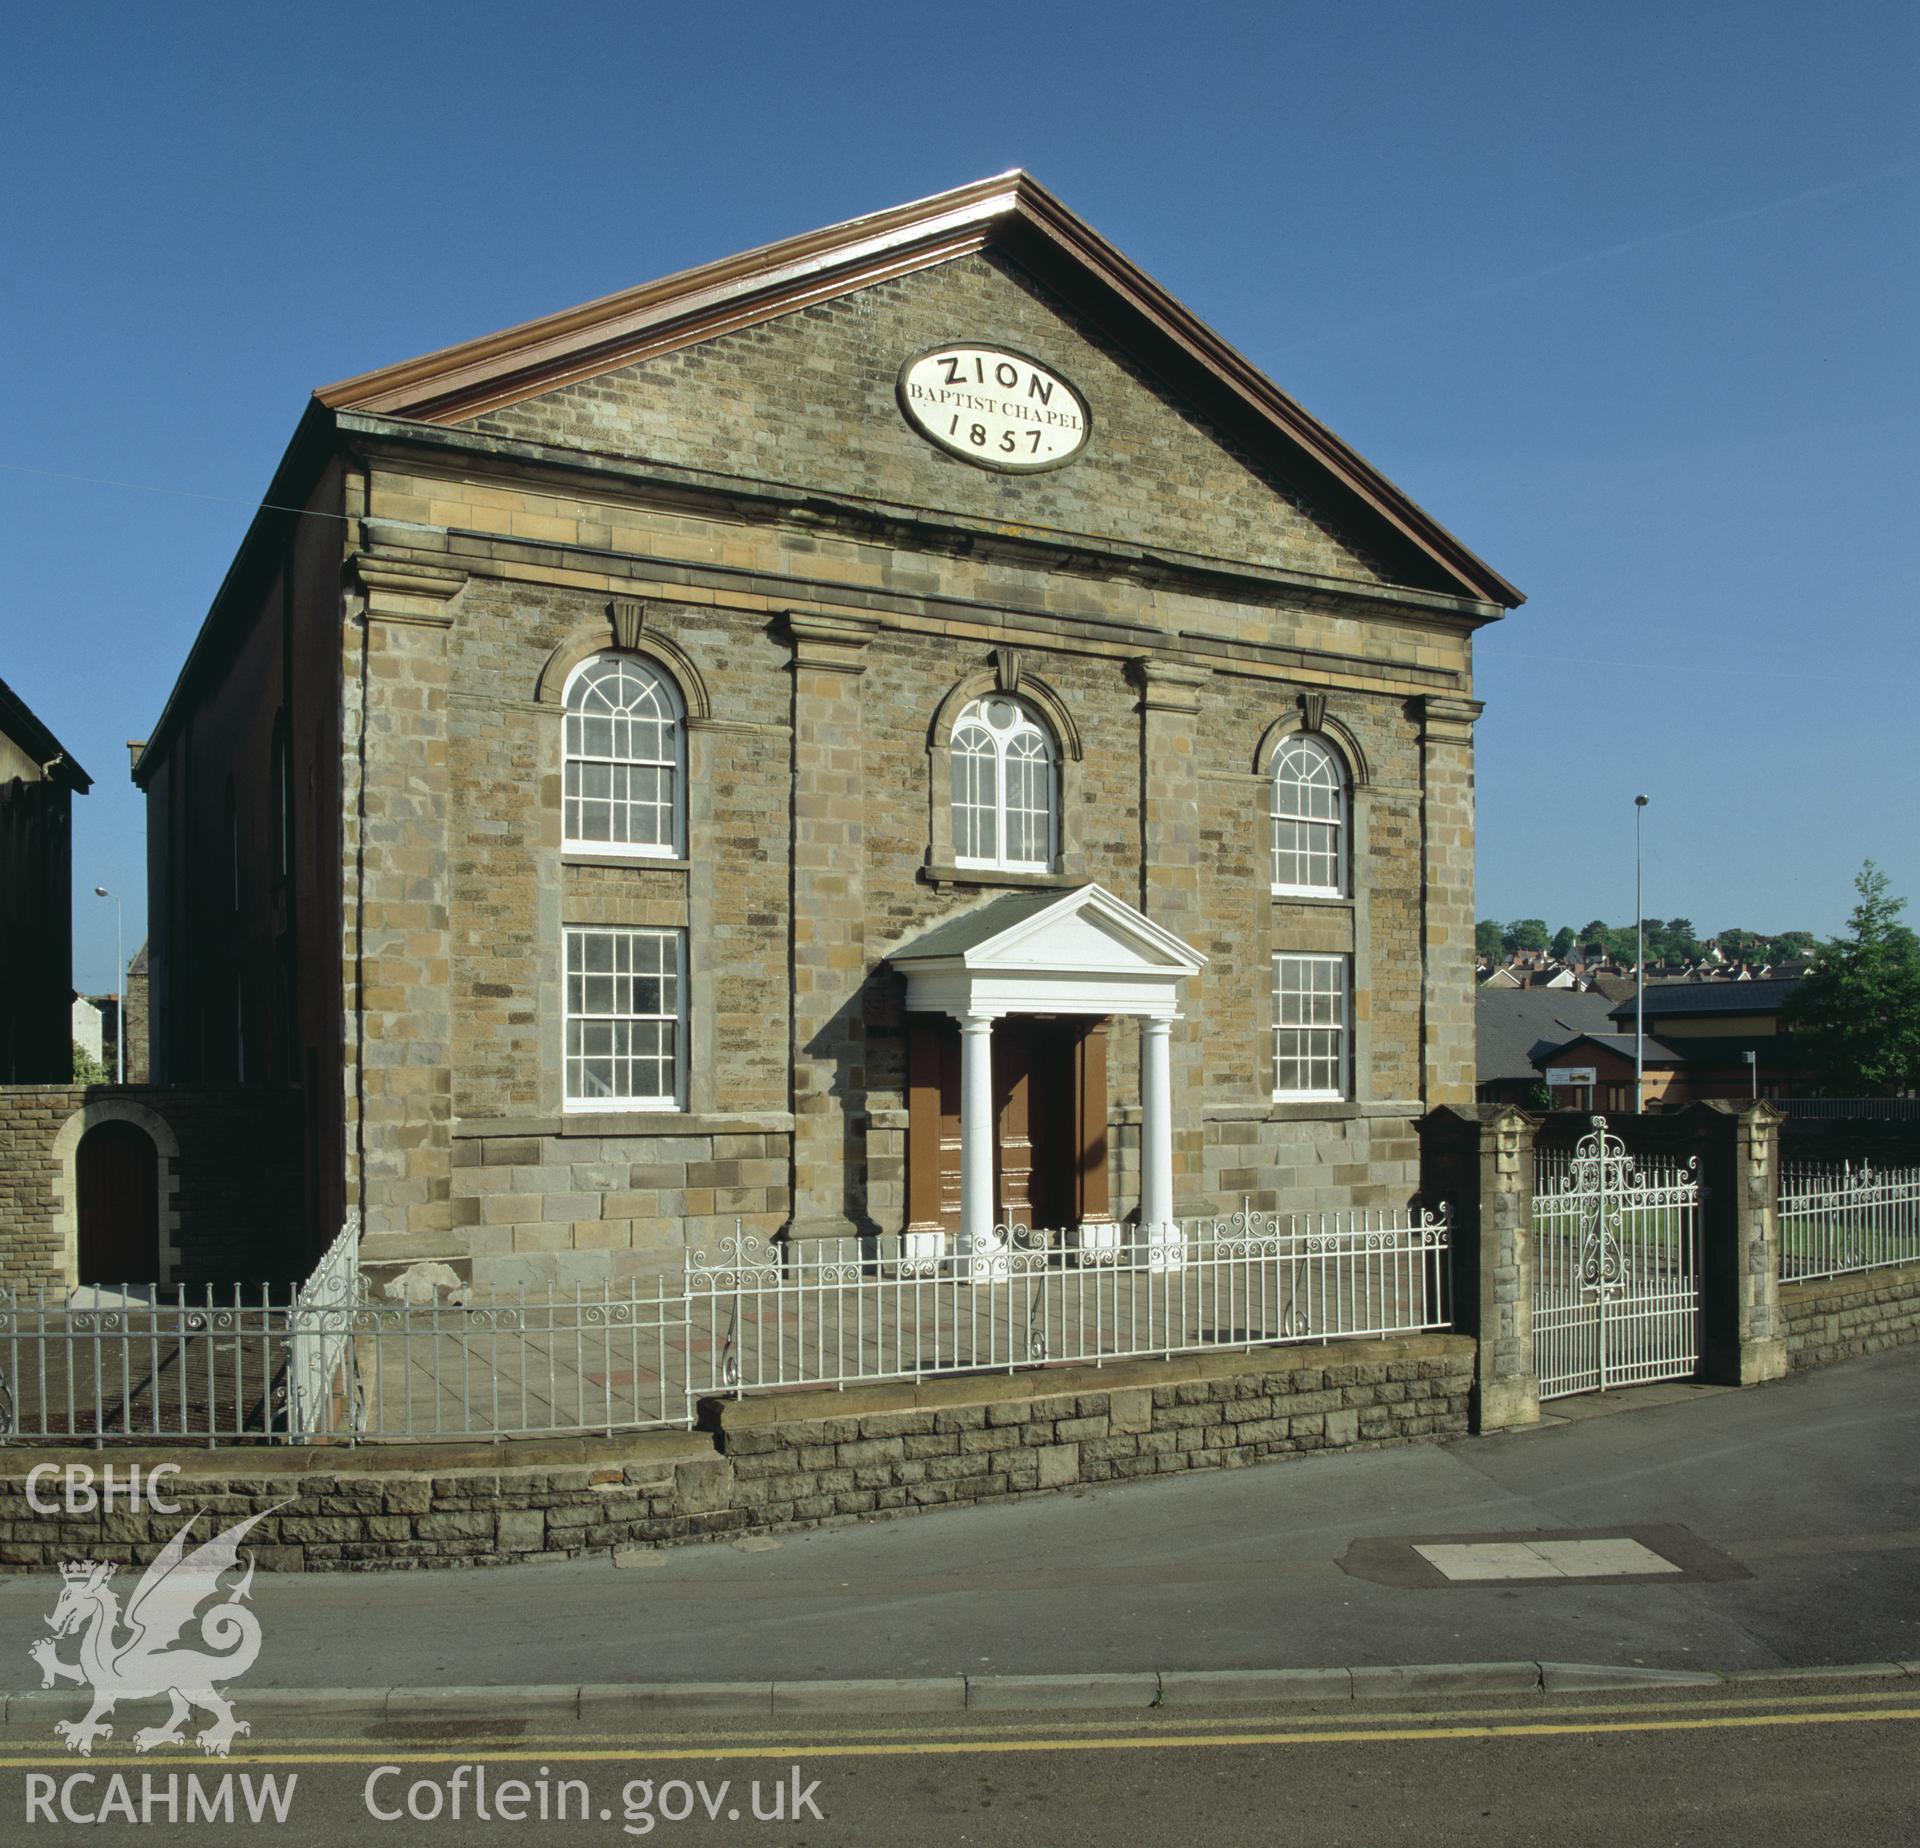 Colour transparency showing exterior view of Seion Chapel, Llanelli, produced by Iain Wright, June 2004.